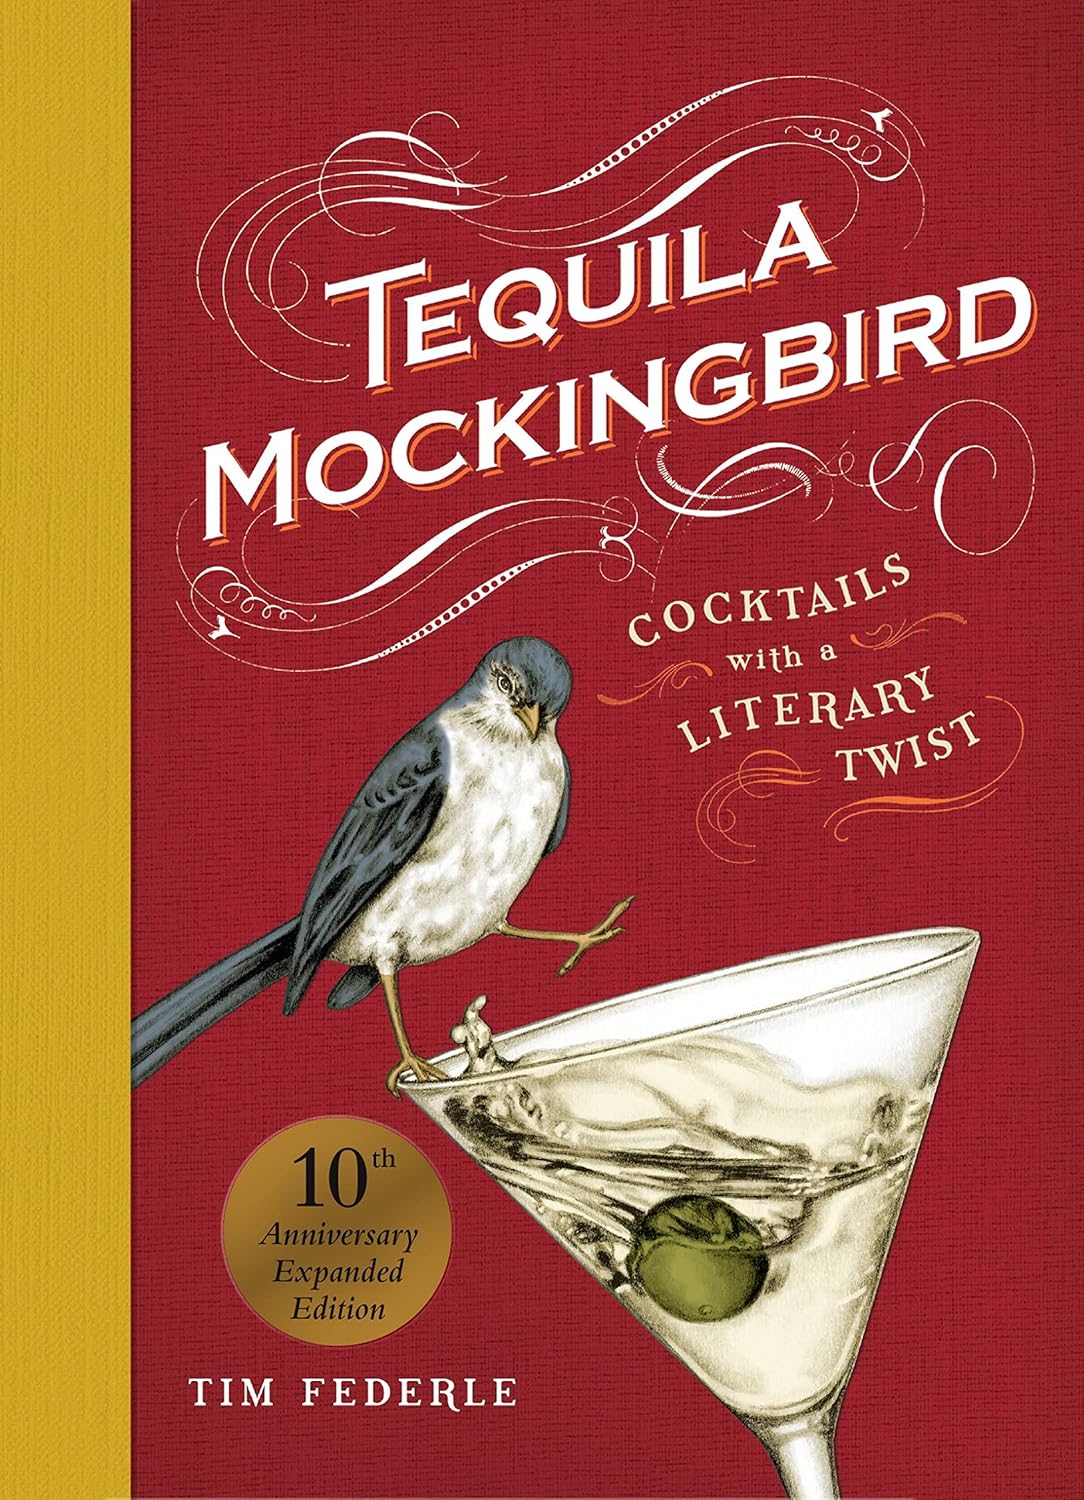 Tequila Mockingbird (10th Anniversary Expanded Edition): Cocktails with a Literary Twist     Hardcover – March 21, 2023